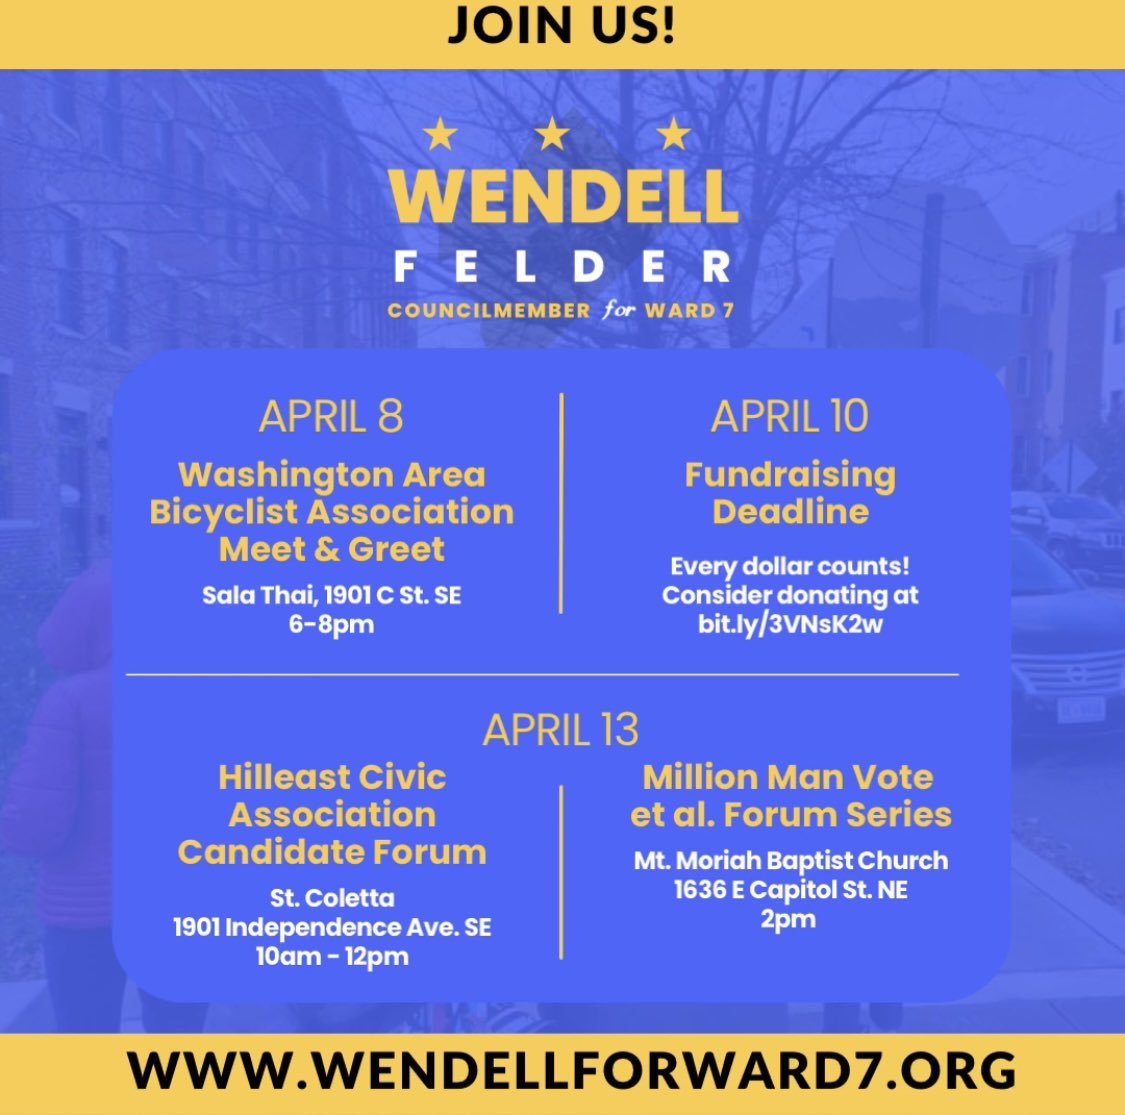 Join us this week for some exciting events and opportunities to meet Wendell! Can’t make the events? Consider donating to the campaign! 4/8 @wabadc Meet & Greet 4/10 Fundraising deadline 4/13 @hilleastcivic Forum 4/13 Million Man Vote Forum #WendellWorks #WinWithWendell